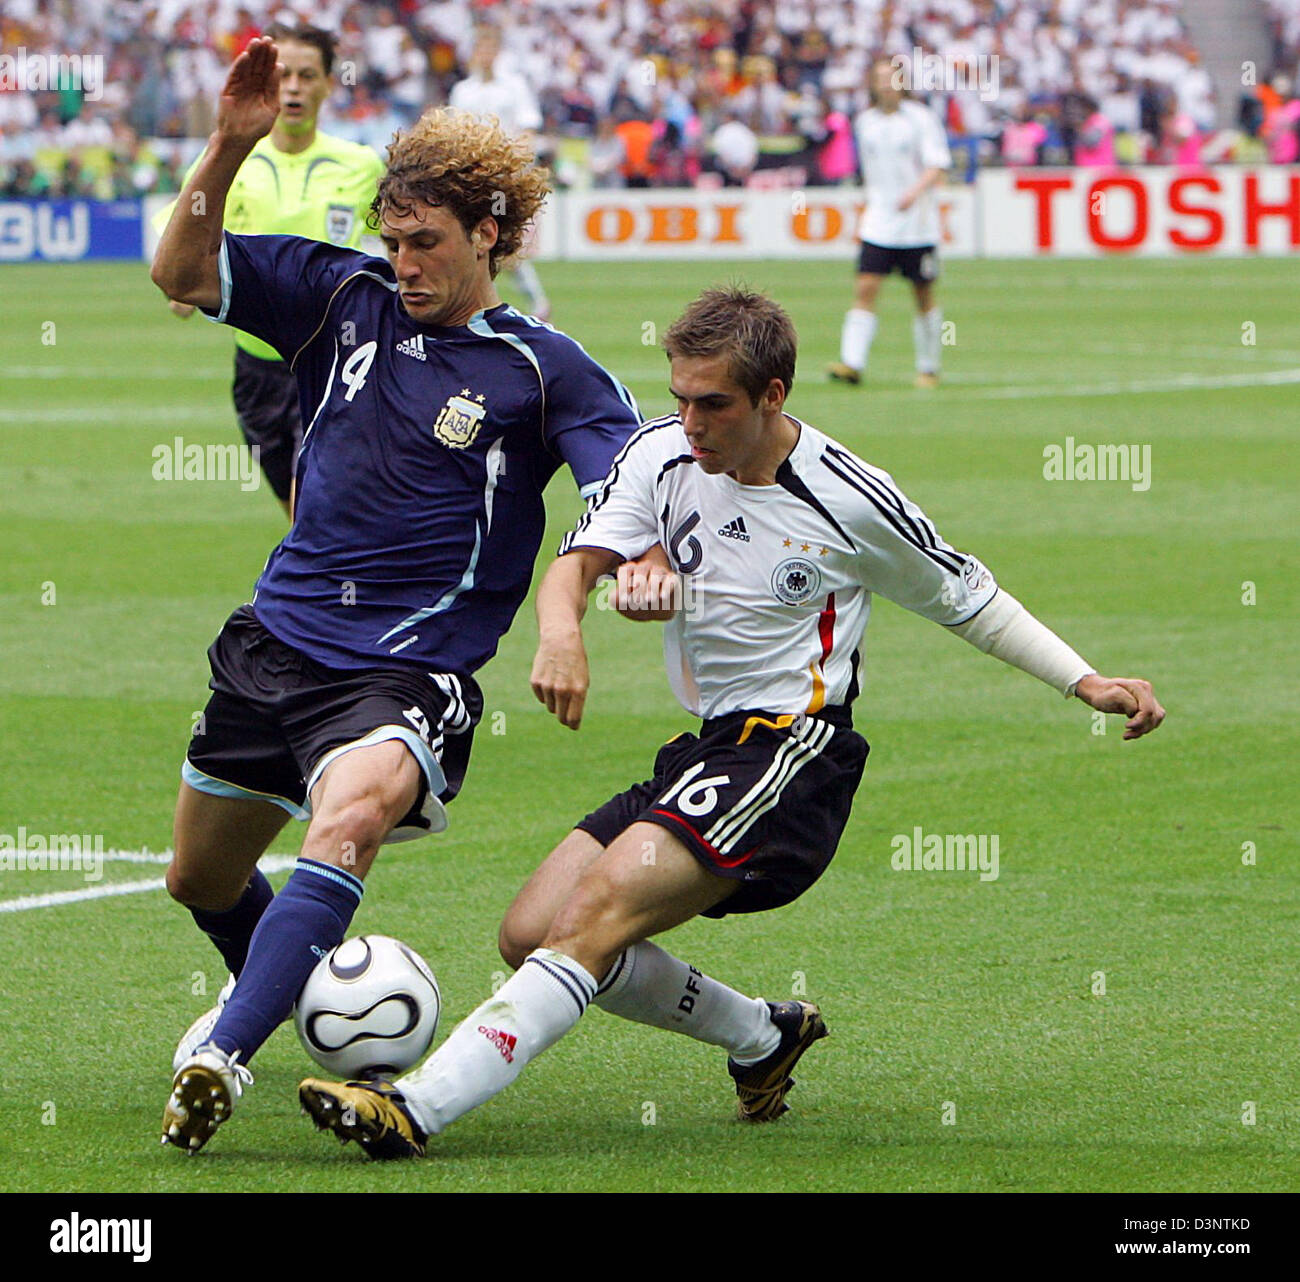 Philipp Lahm (R) of Germany vies with Fabricio Coloccini of Argentina during the quarter final of the 2006 FIFA World Cup between Germany and Argentina at the Olympic Stadium in Berlin, Germany, Friday, 30 June 2006. Photo: THOMAS EISENHUTH +++ Mobile Services OUT +++ Please refer to FIFA's Terms and Conditions. Stock Photo